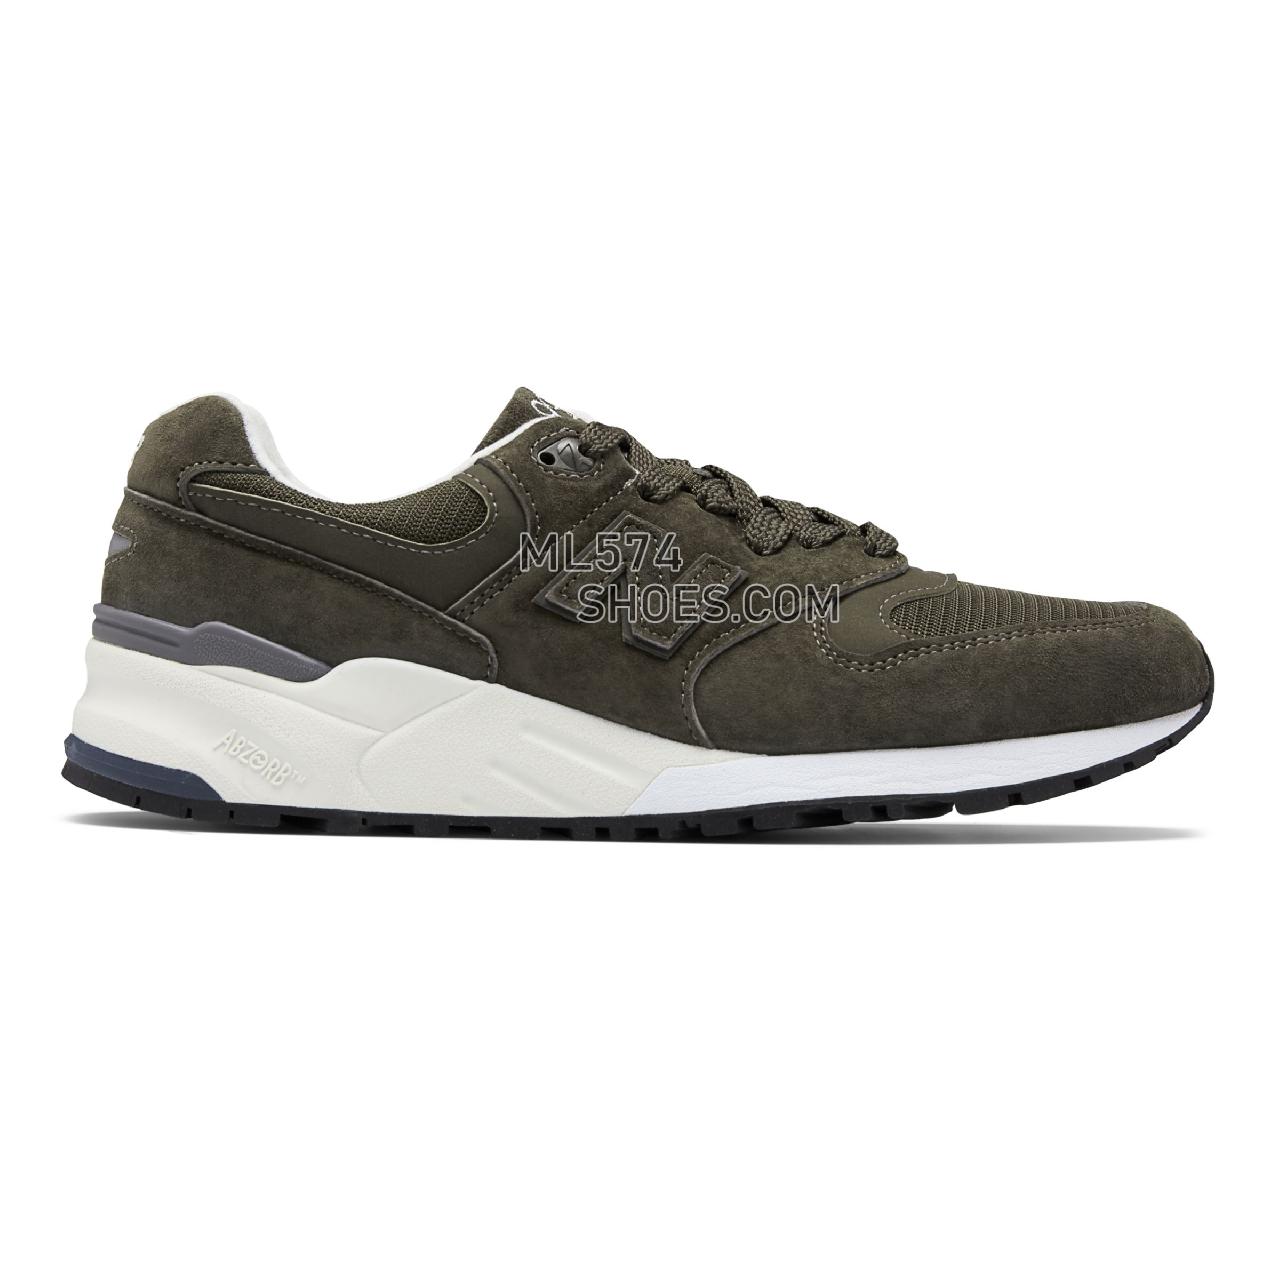 New Balance 999 Made in US - Men's 999 - Classic Green with White - M999NJ